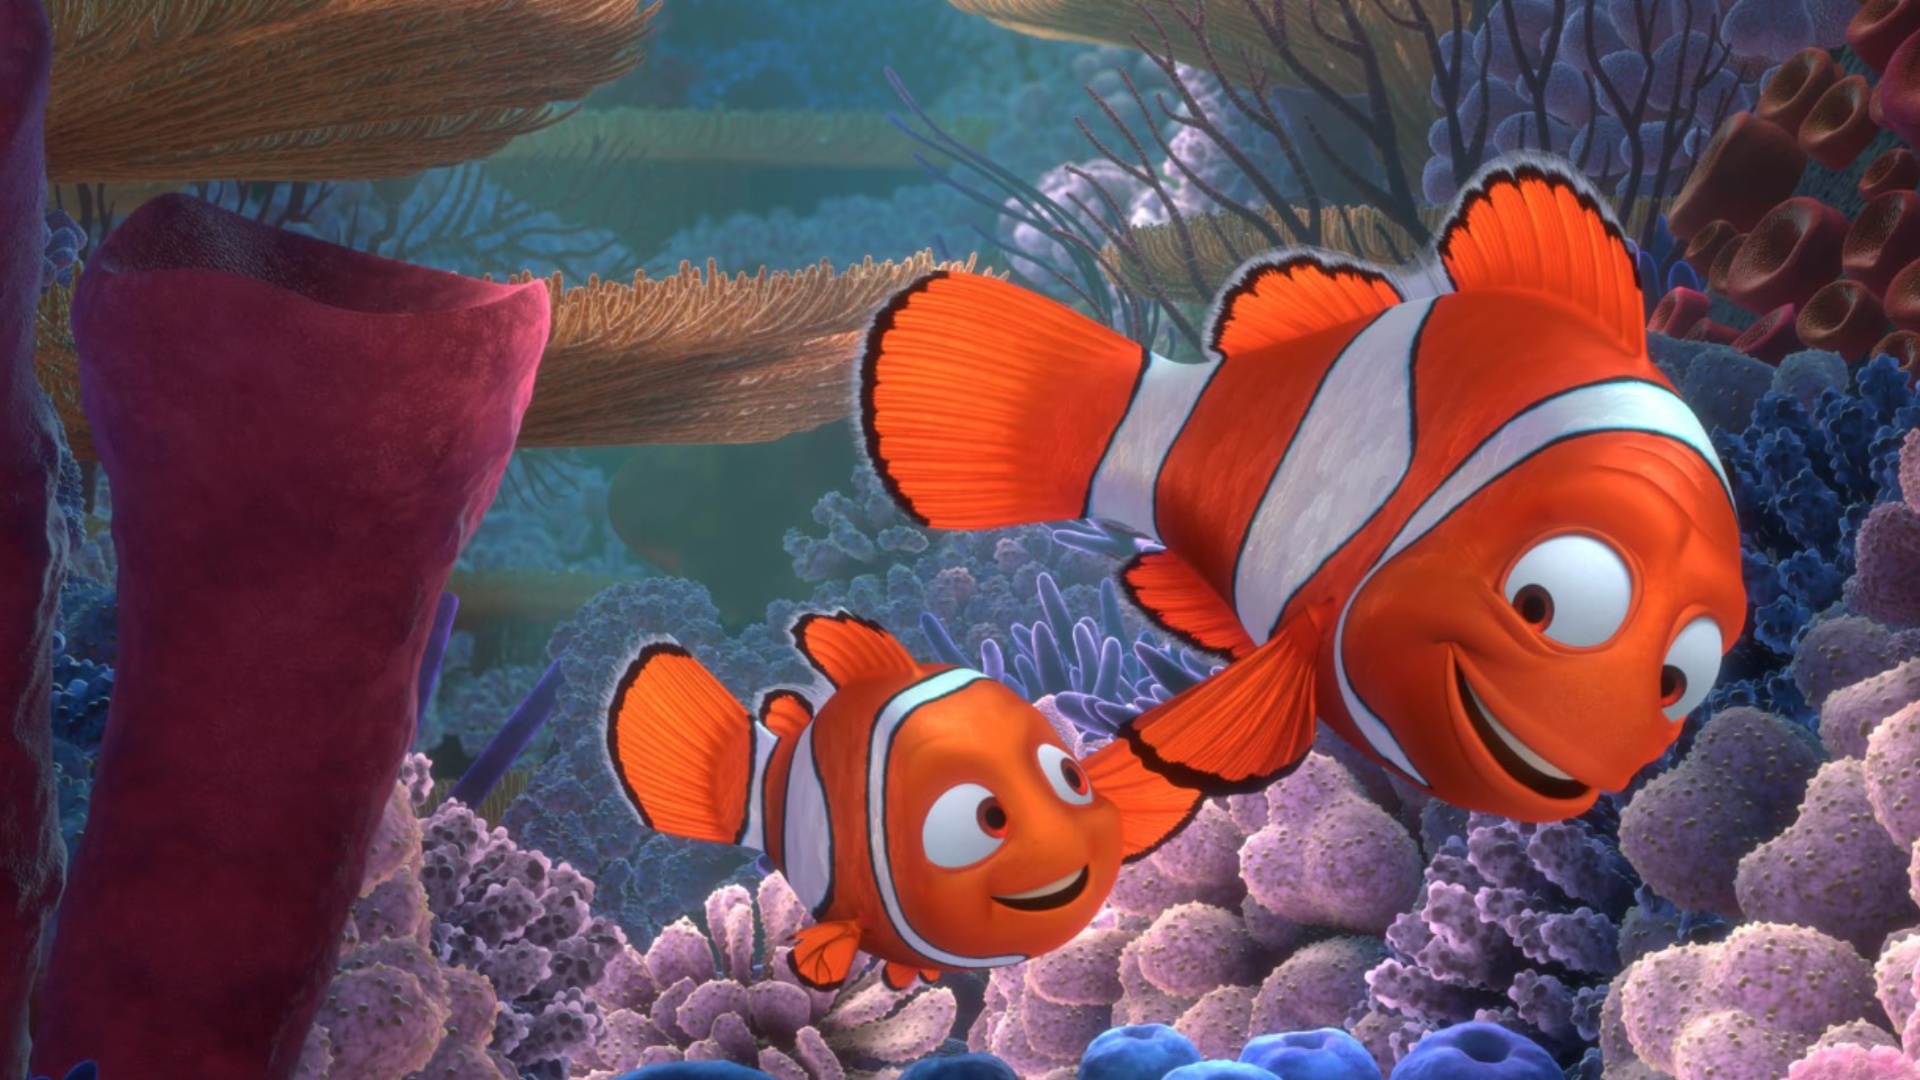 Pixar animator reveals how one last-minute change to Finding Nemo stopped the studio making its "first bad movie"